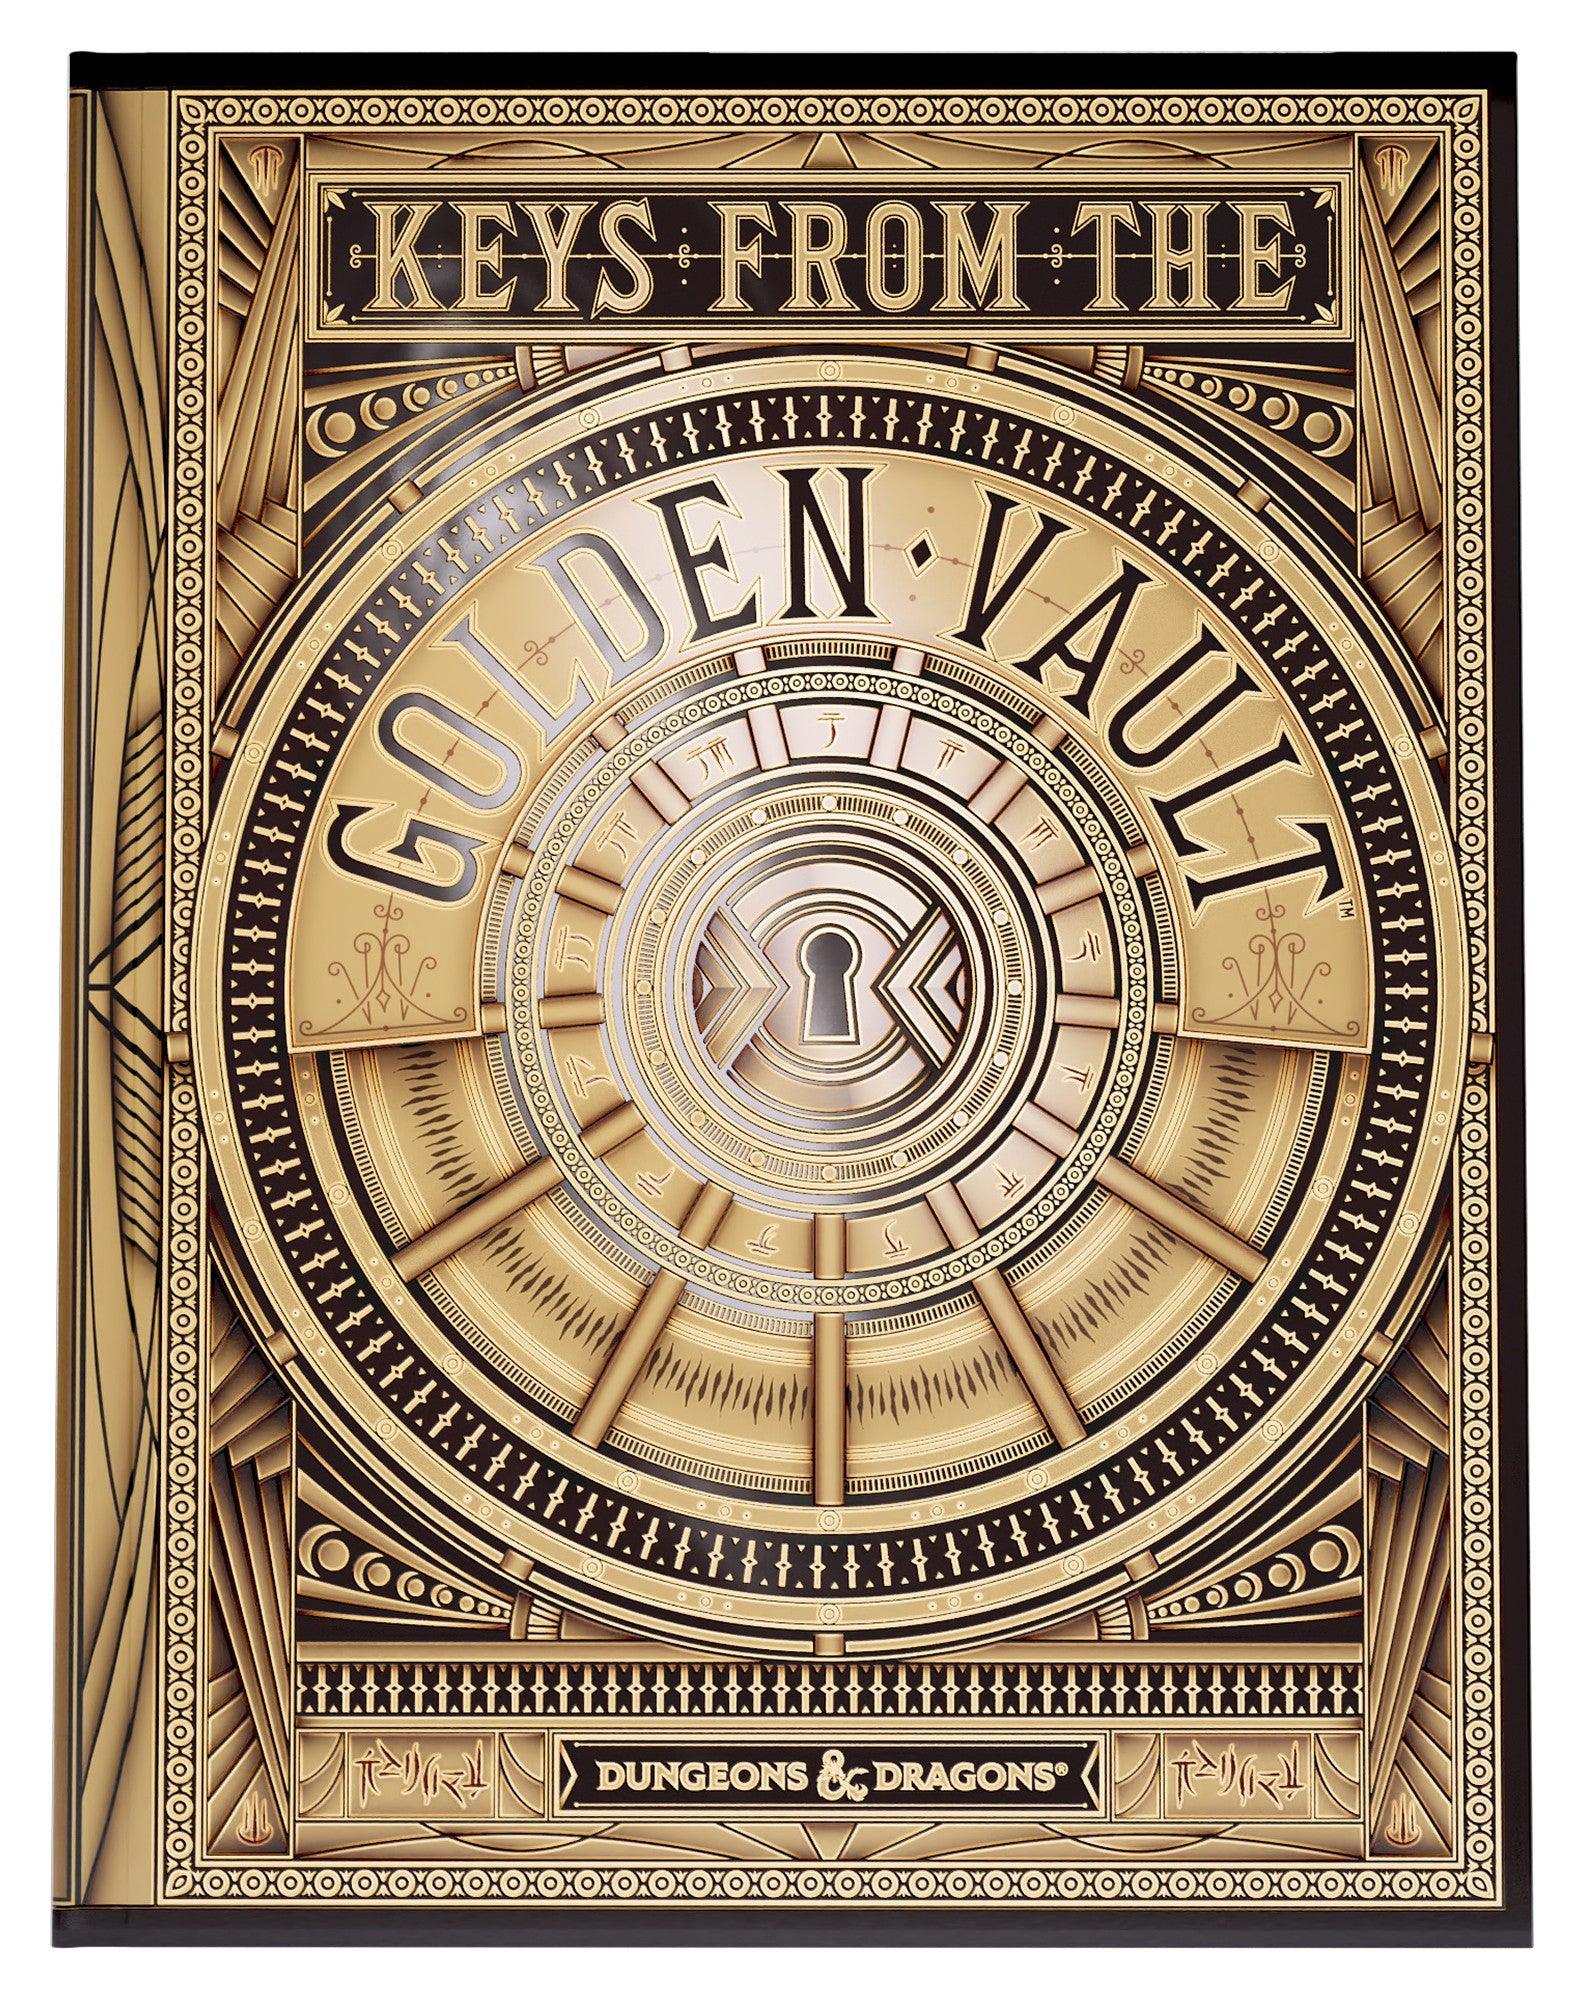 VR-105227 D&D Dungeons & Dragons Keys From the Golden Vault Hardcover Alternative Cover - Wizards of the Coast - Titan Pop Culture